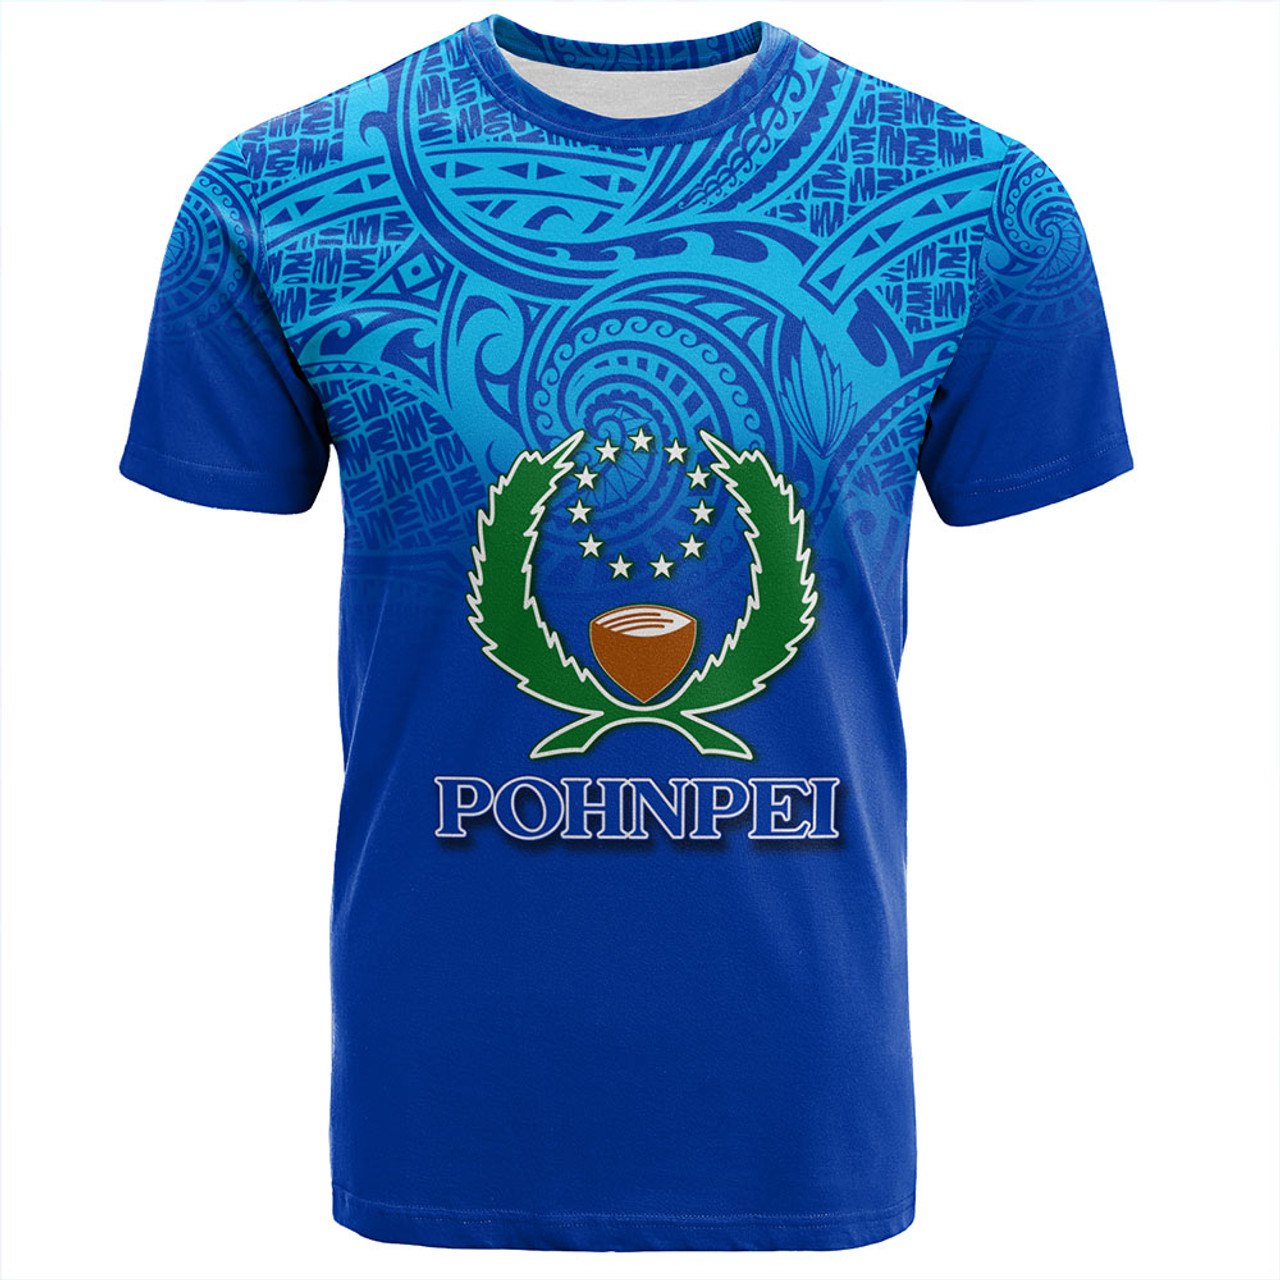 Pohnpei State T-Shirt Flag Color With Traditional Patterns